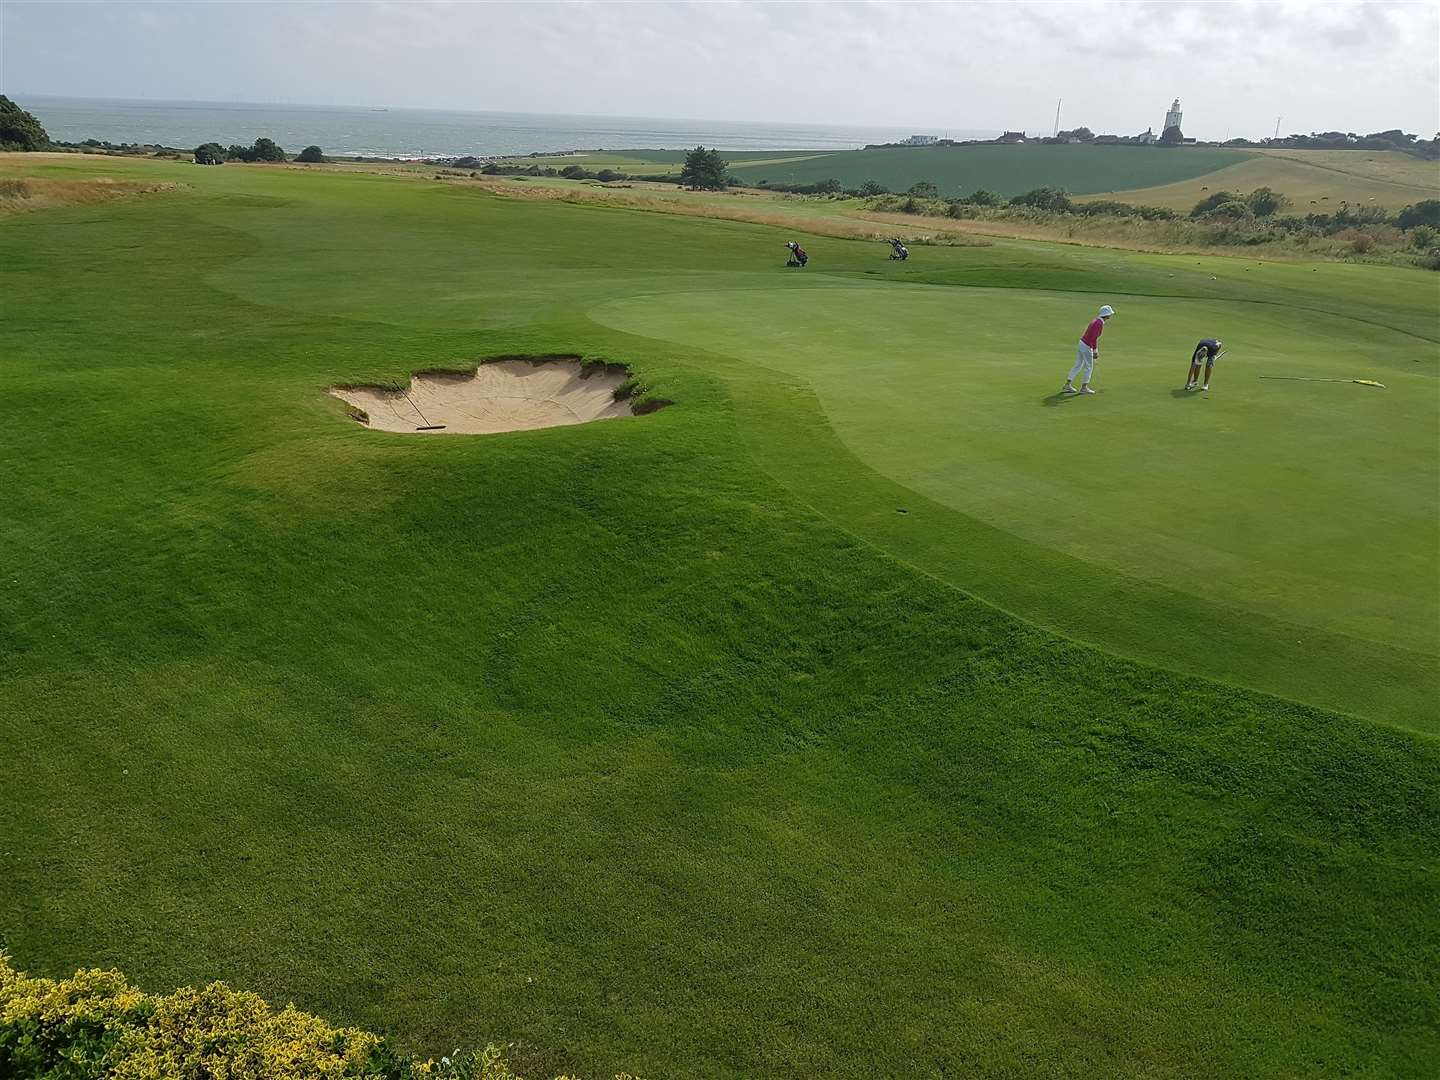 North Foreland Golf Club - the land which is now occupied by holes 10-18 and the short course were previously owned by Lord Northcliffe